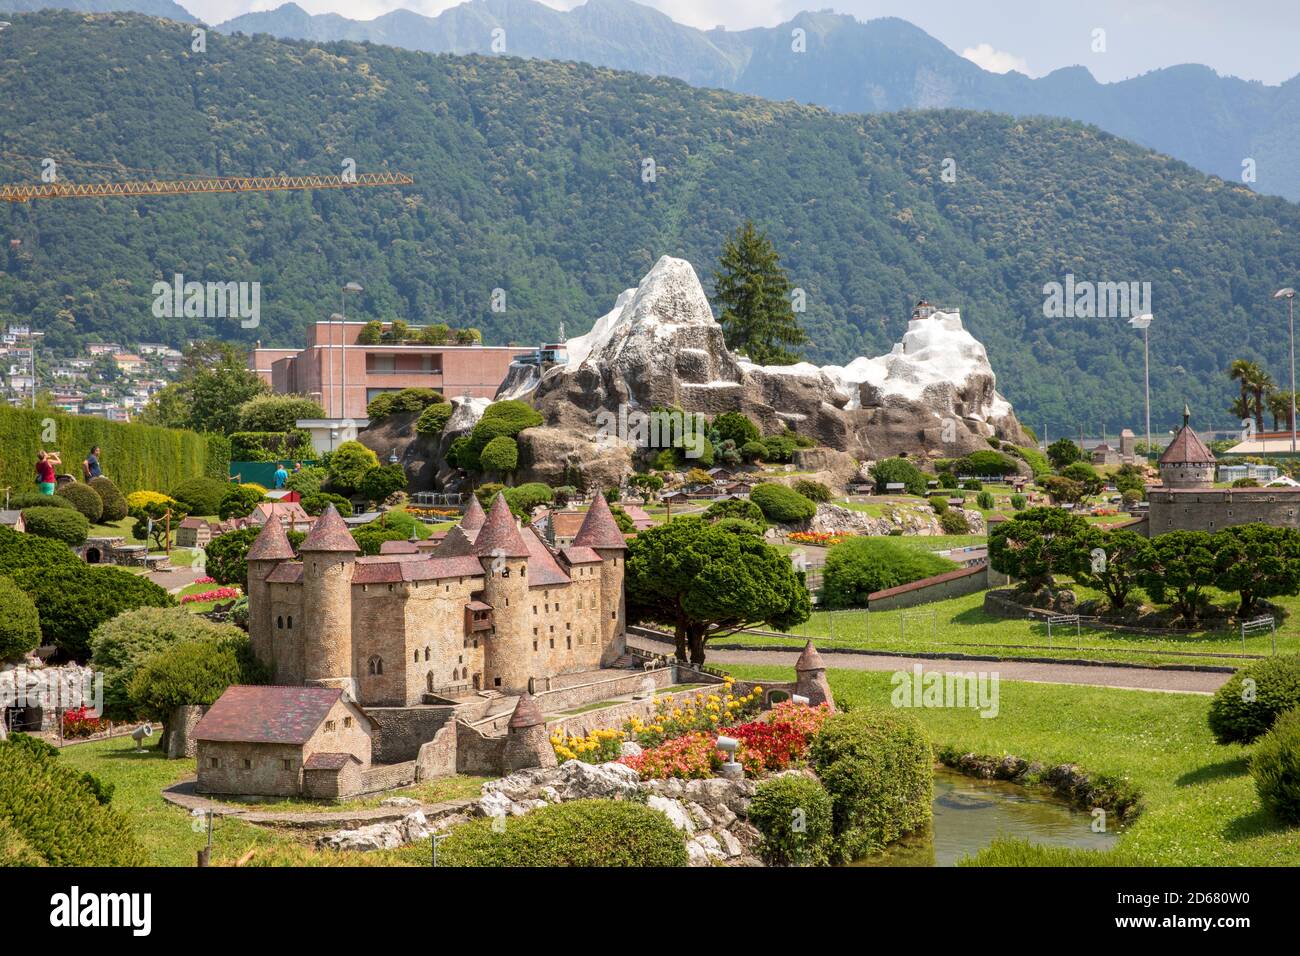 A view of Swissminiatur, open-air miniature park placed in Melide, on the shore of Lake Lugano, Melide, Lugano, Switzerland, Europe. Stock Photo